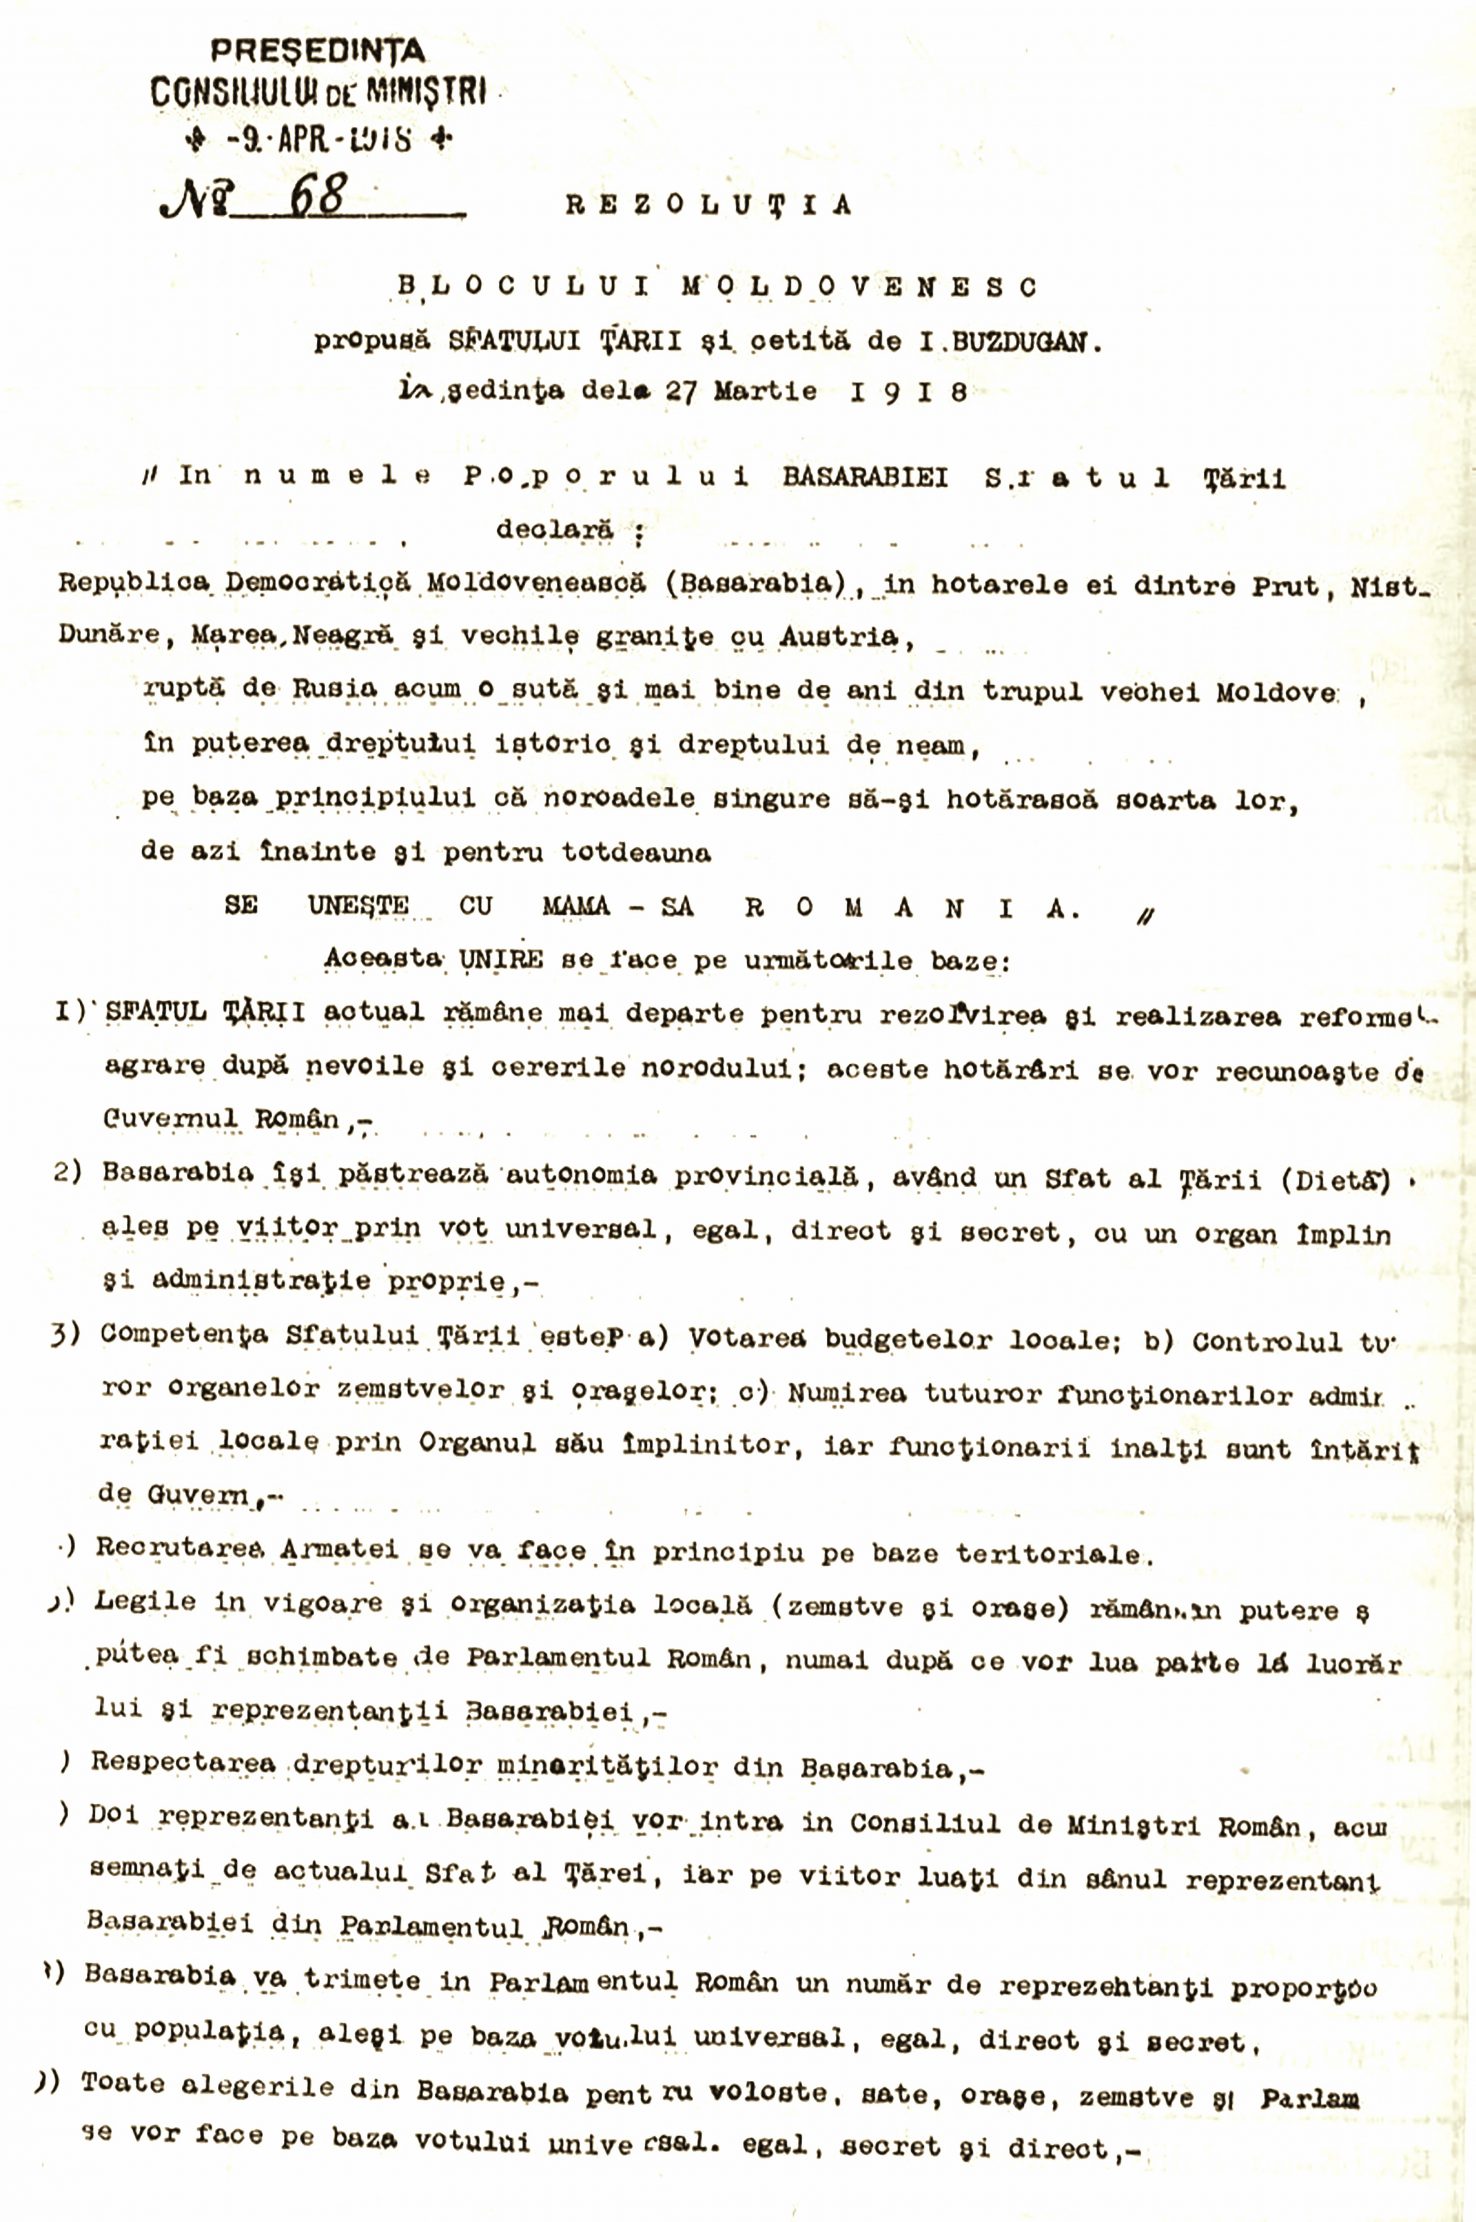 The resolution of the Moldovan Bloc proposed to the Council of the Land and read by Ion Buzdugan at the meeting of March 27, 1918 (ANR)